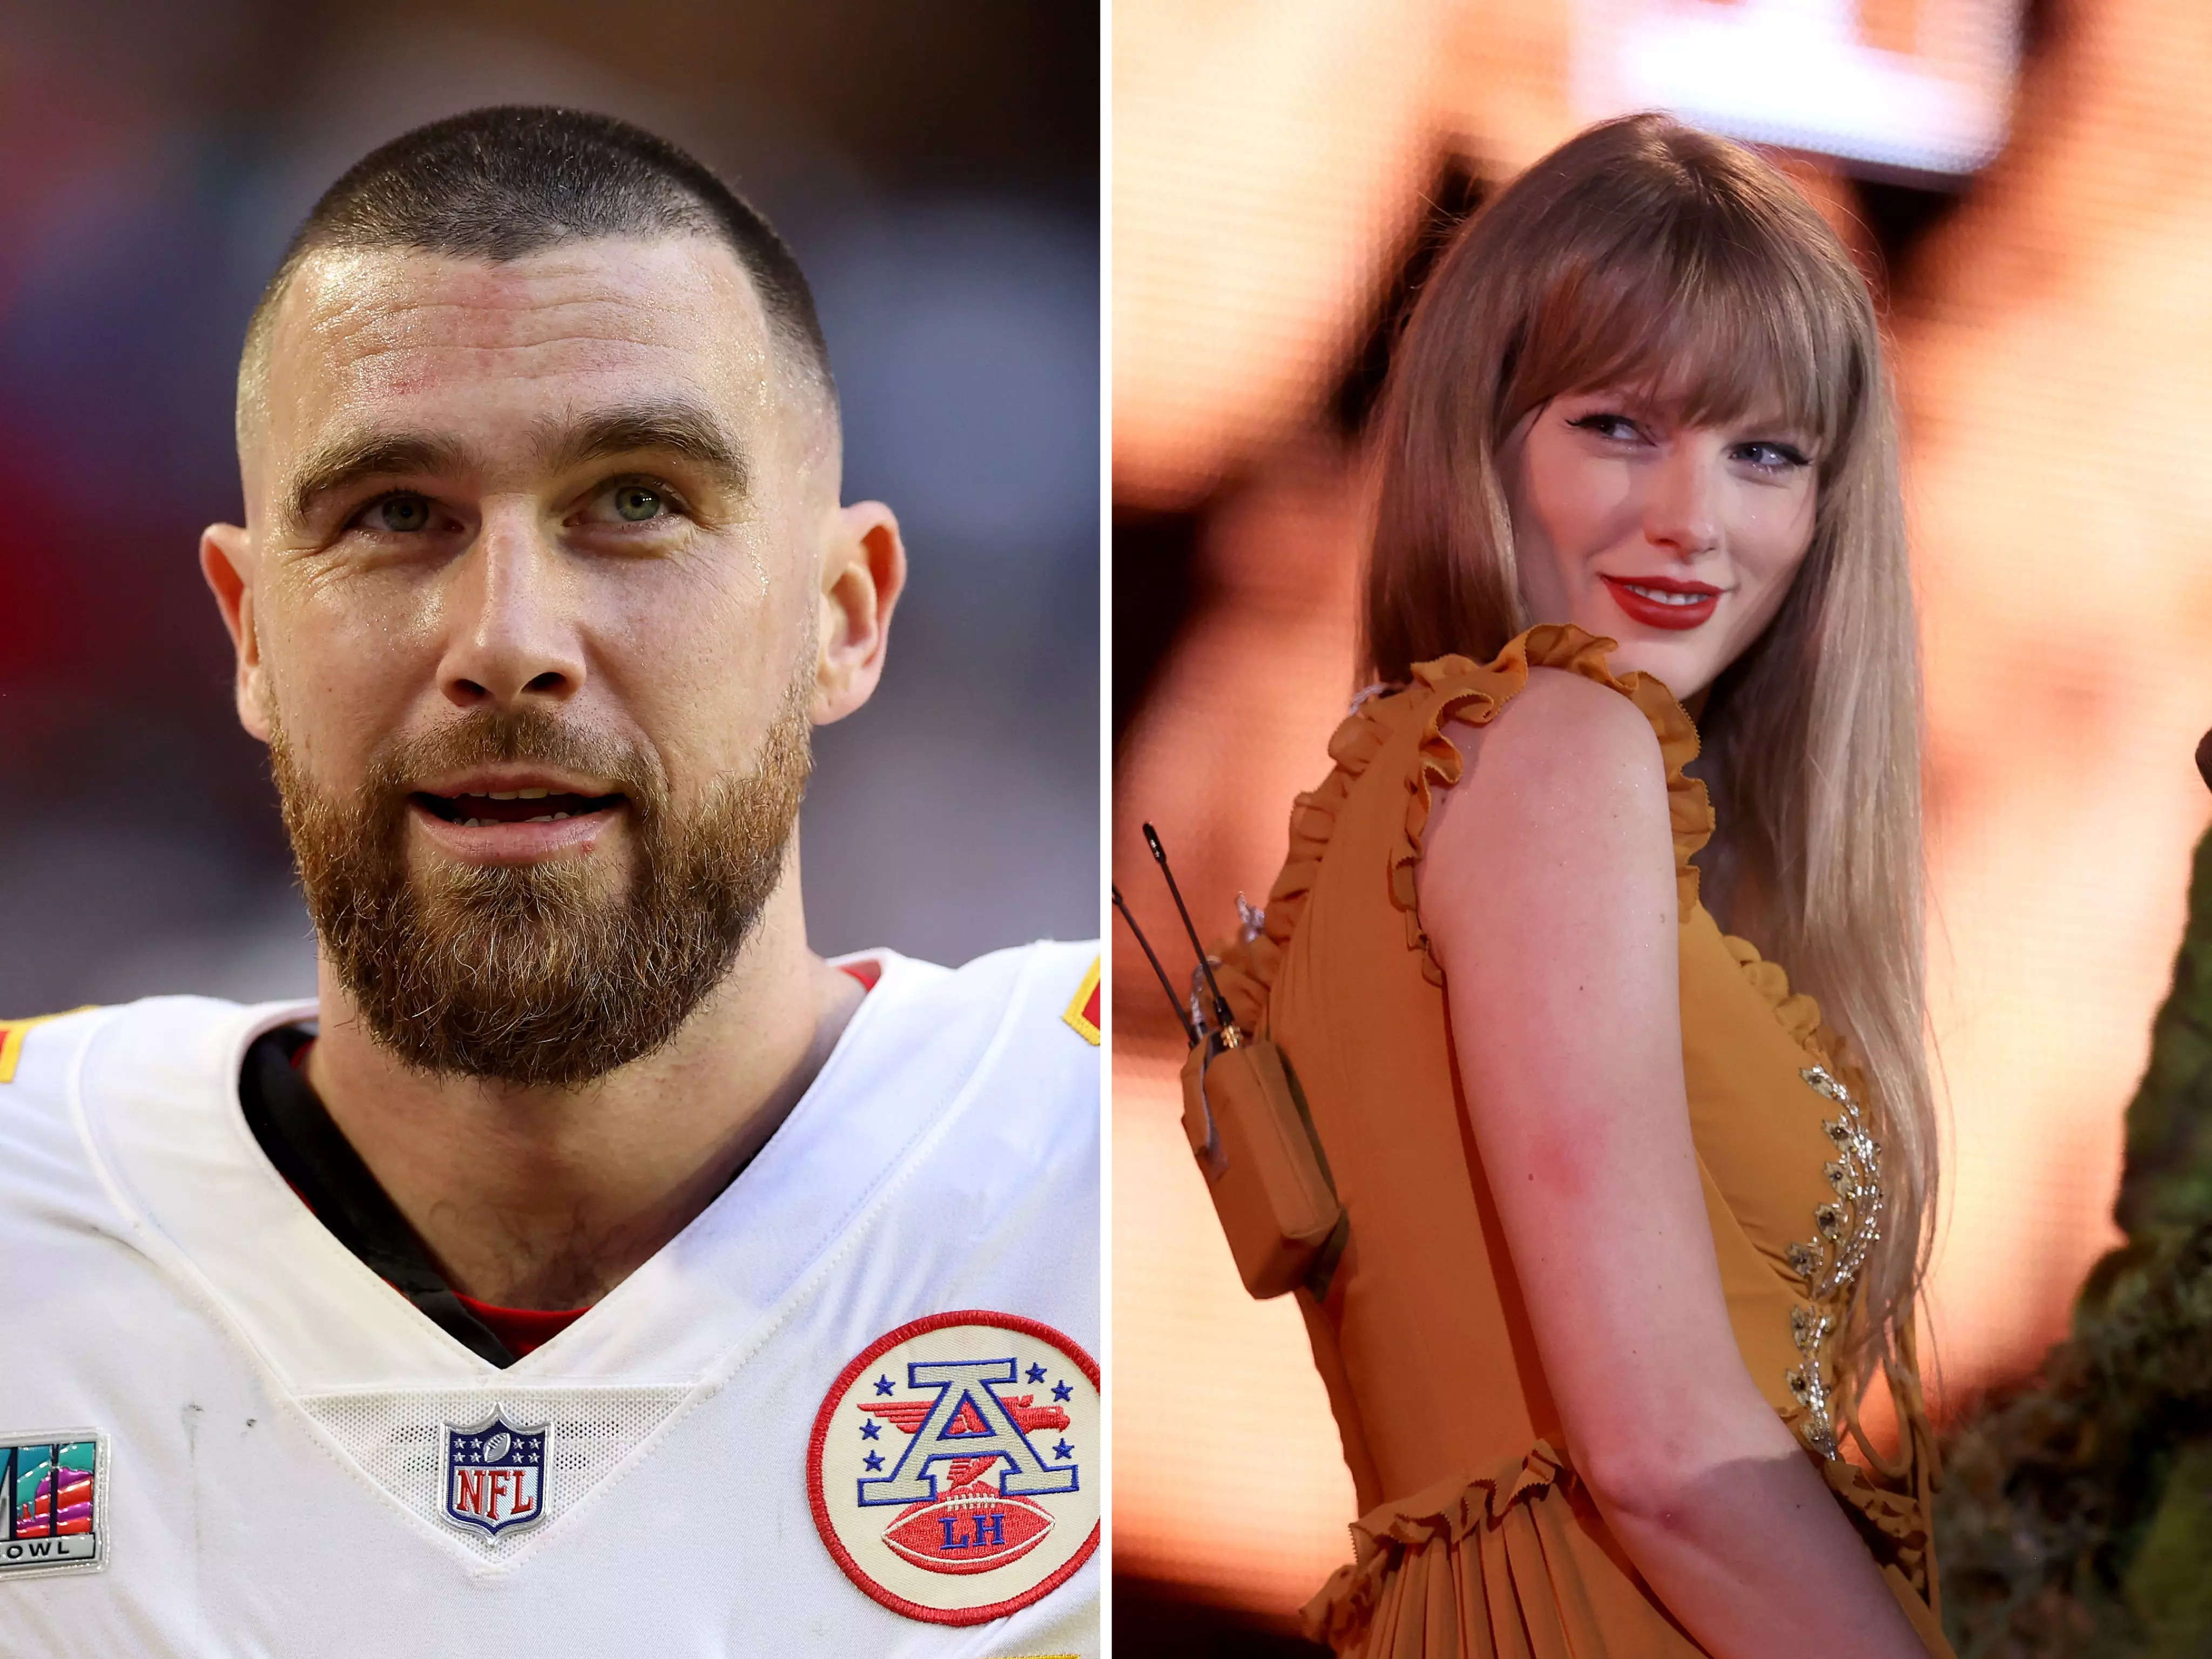 Nfl Player Travis Kelce Tried To Woo Taylor Swift With A Friendship Bracelet At Her Concert